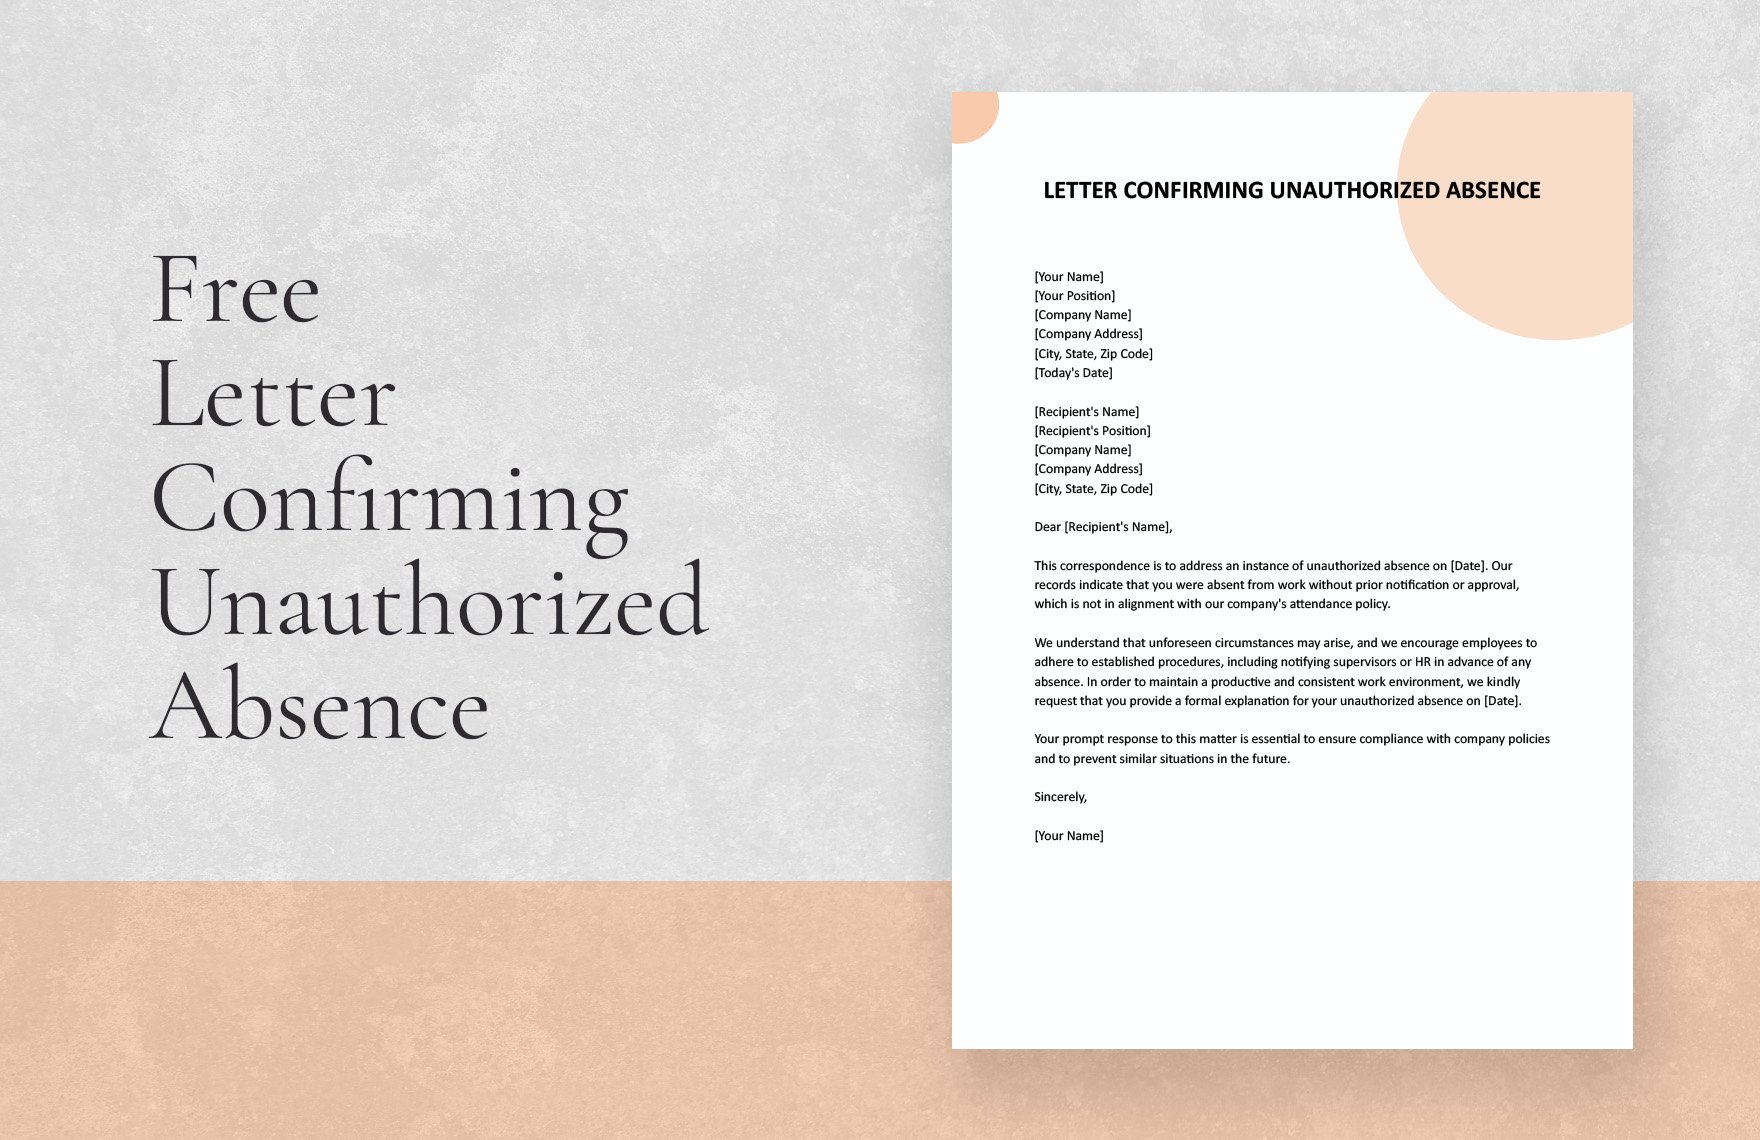 Letter Confirming Unauthorized Absence